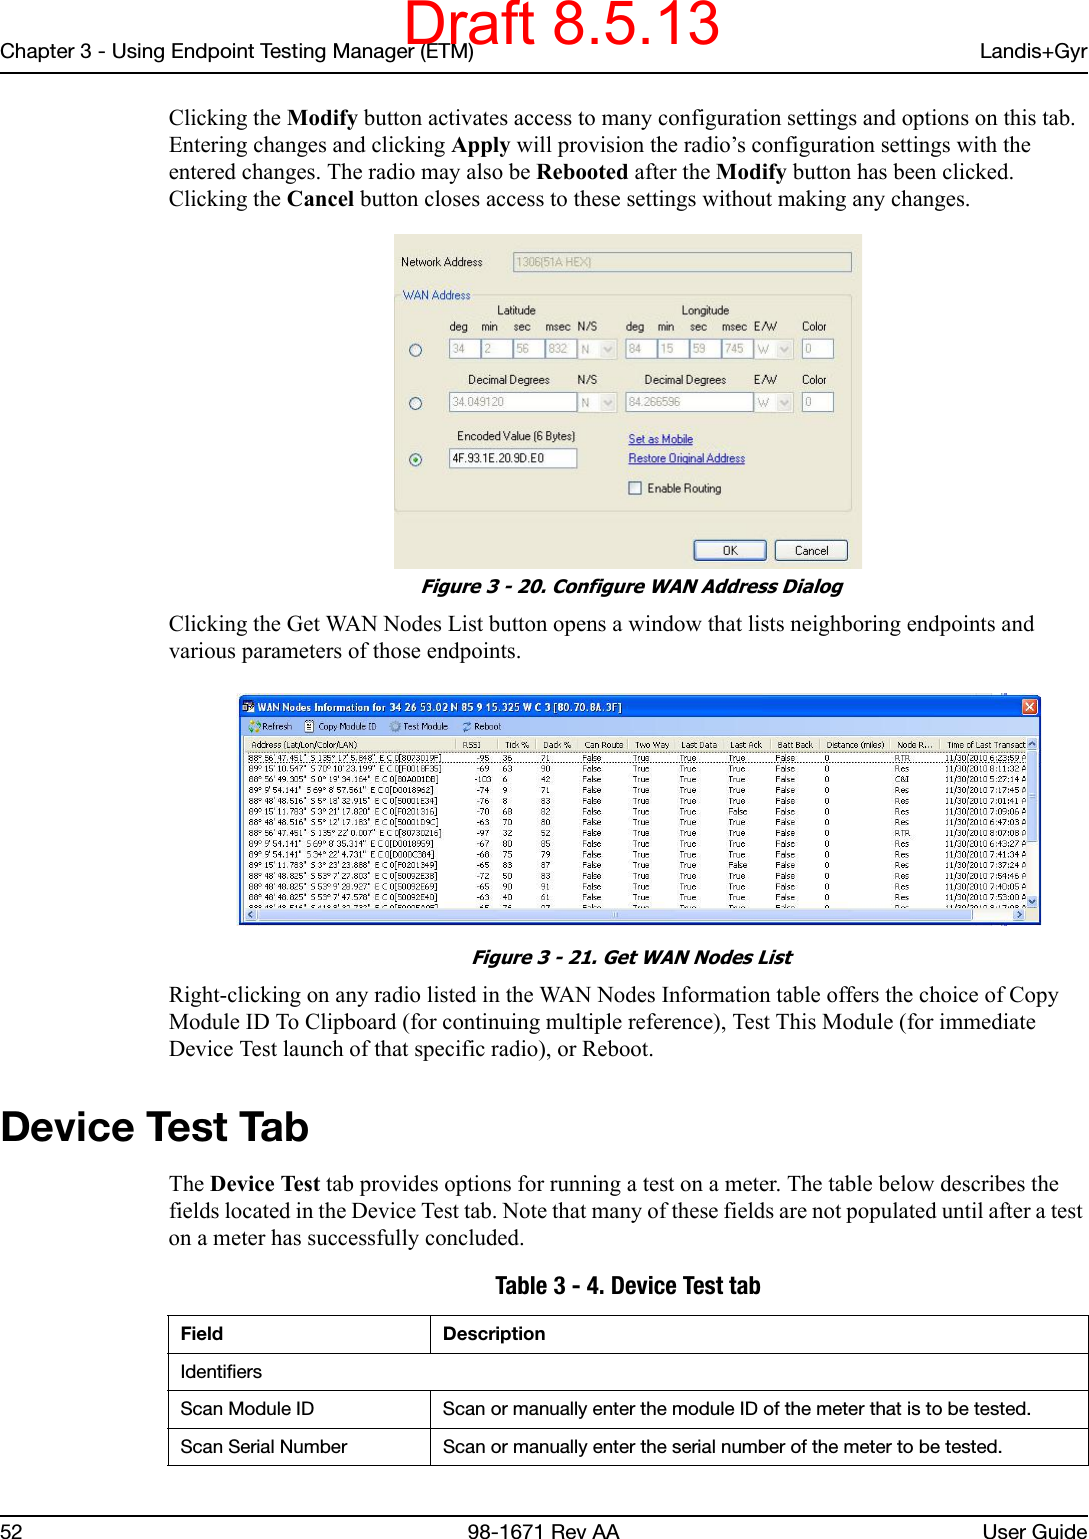 Chapter 3 - Using Endpoint Testing Manager (ETM) Landis+Gyr52 98-1671 Rev AA User GuideClicking the Modify button activates access to many configuration settings and options on this tab. Entering changes and clicking Apply will provision the radio’s configuration settings with the entered changes. The radio may also be Rebooted after the Modify button has been clicked. Clicking the Cancel button closes access to these settings without making any changes. Figure 3 - 20. Configure WAN Address DialogClicking the Get WAN Nodes List button opens a window that lists neighboring endpoints and various parameters of those endpoints. Figure 3 - 21. Get WAN Nodes ListRight-clicking on any radio listed in the WAN Nodes Information table offers the choice of Copy Module ID To Clipboard (for continuing multiple reference), Test This Module (for immediate Device Test launch of that specific radio), or Reboot.Device Test TabThe Device Test tab provides options for running a test on a meter. The table below describes the fields located in the Device Test tab. Note that many of these fields are not populated until after a test on a meter has successfully concluded. Table 3 - 4. Device Test tabField DescriptionIdentifiersScan Module ID Scan or manually enter the module ID of the meter that is to be tested.Scan Serial Number Scan or manually enter the serial number of the meter to be tested.Draft 8.5.13